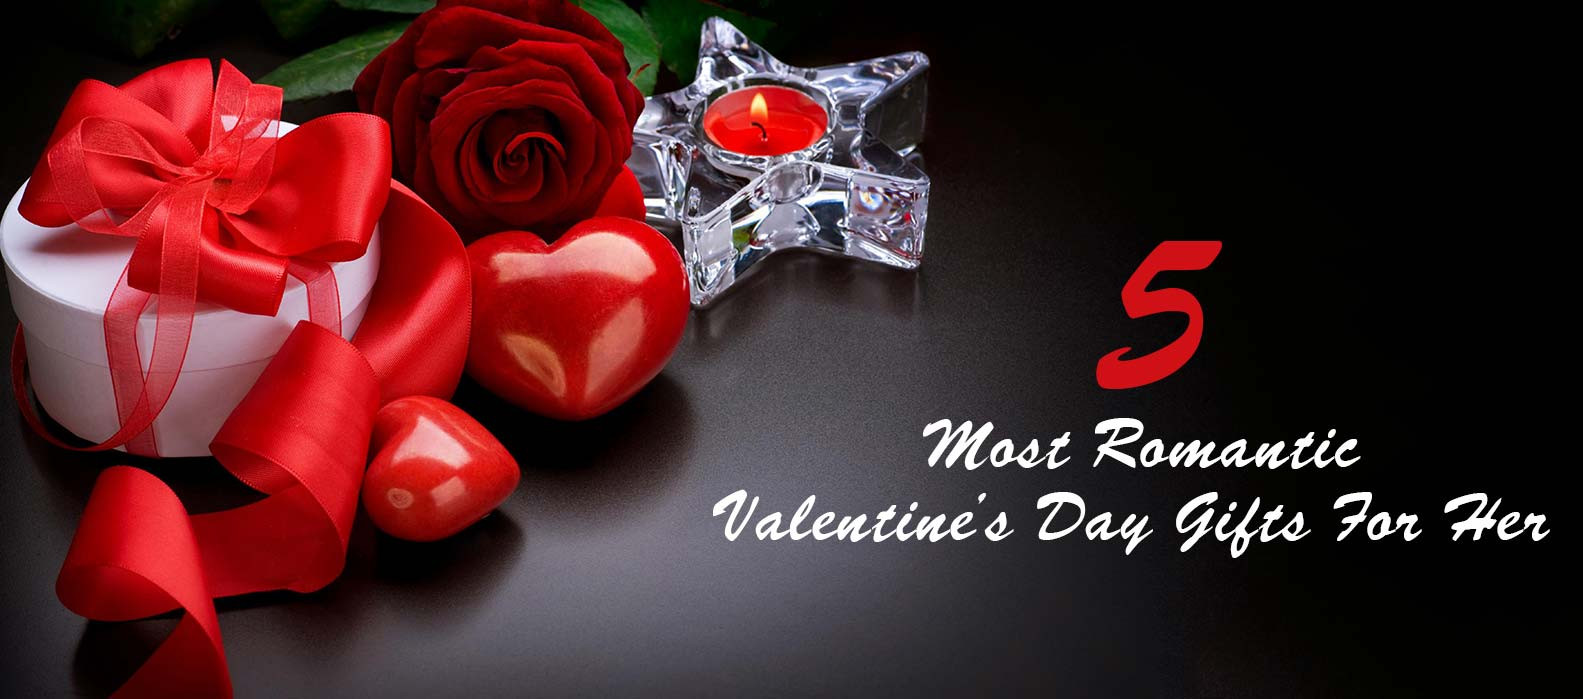 Romantic Valentines Day Gift For Her
 5 Most Romantic Valentine s Day Gifts For Her Tajonline